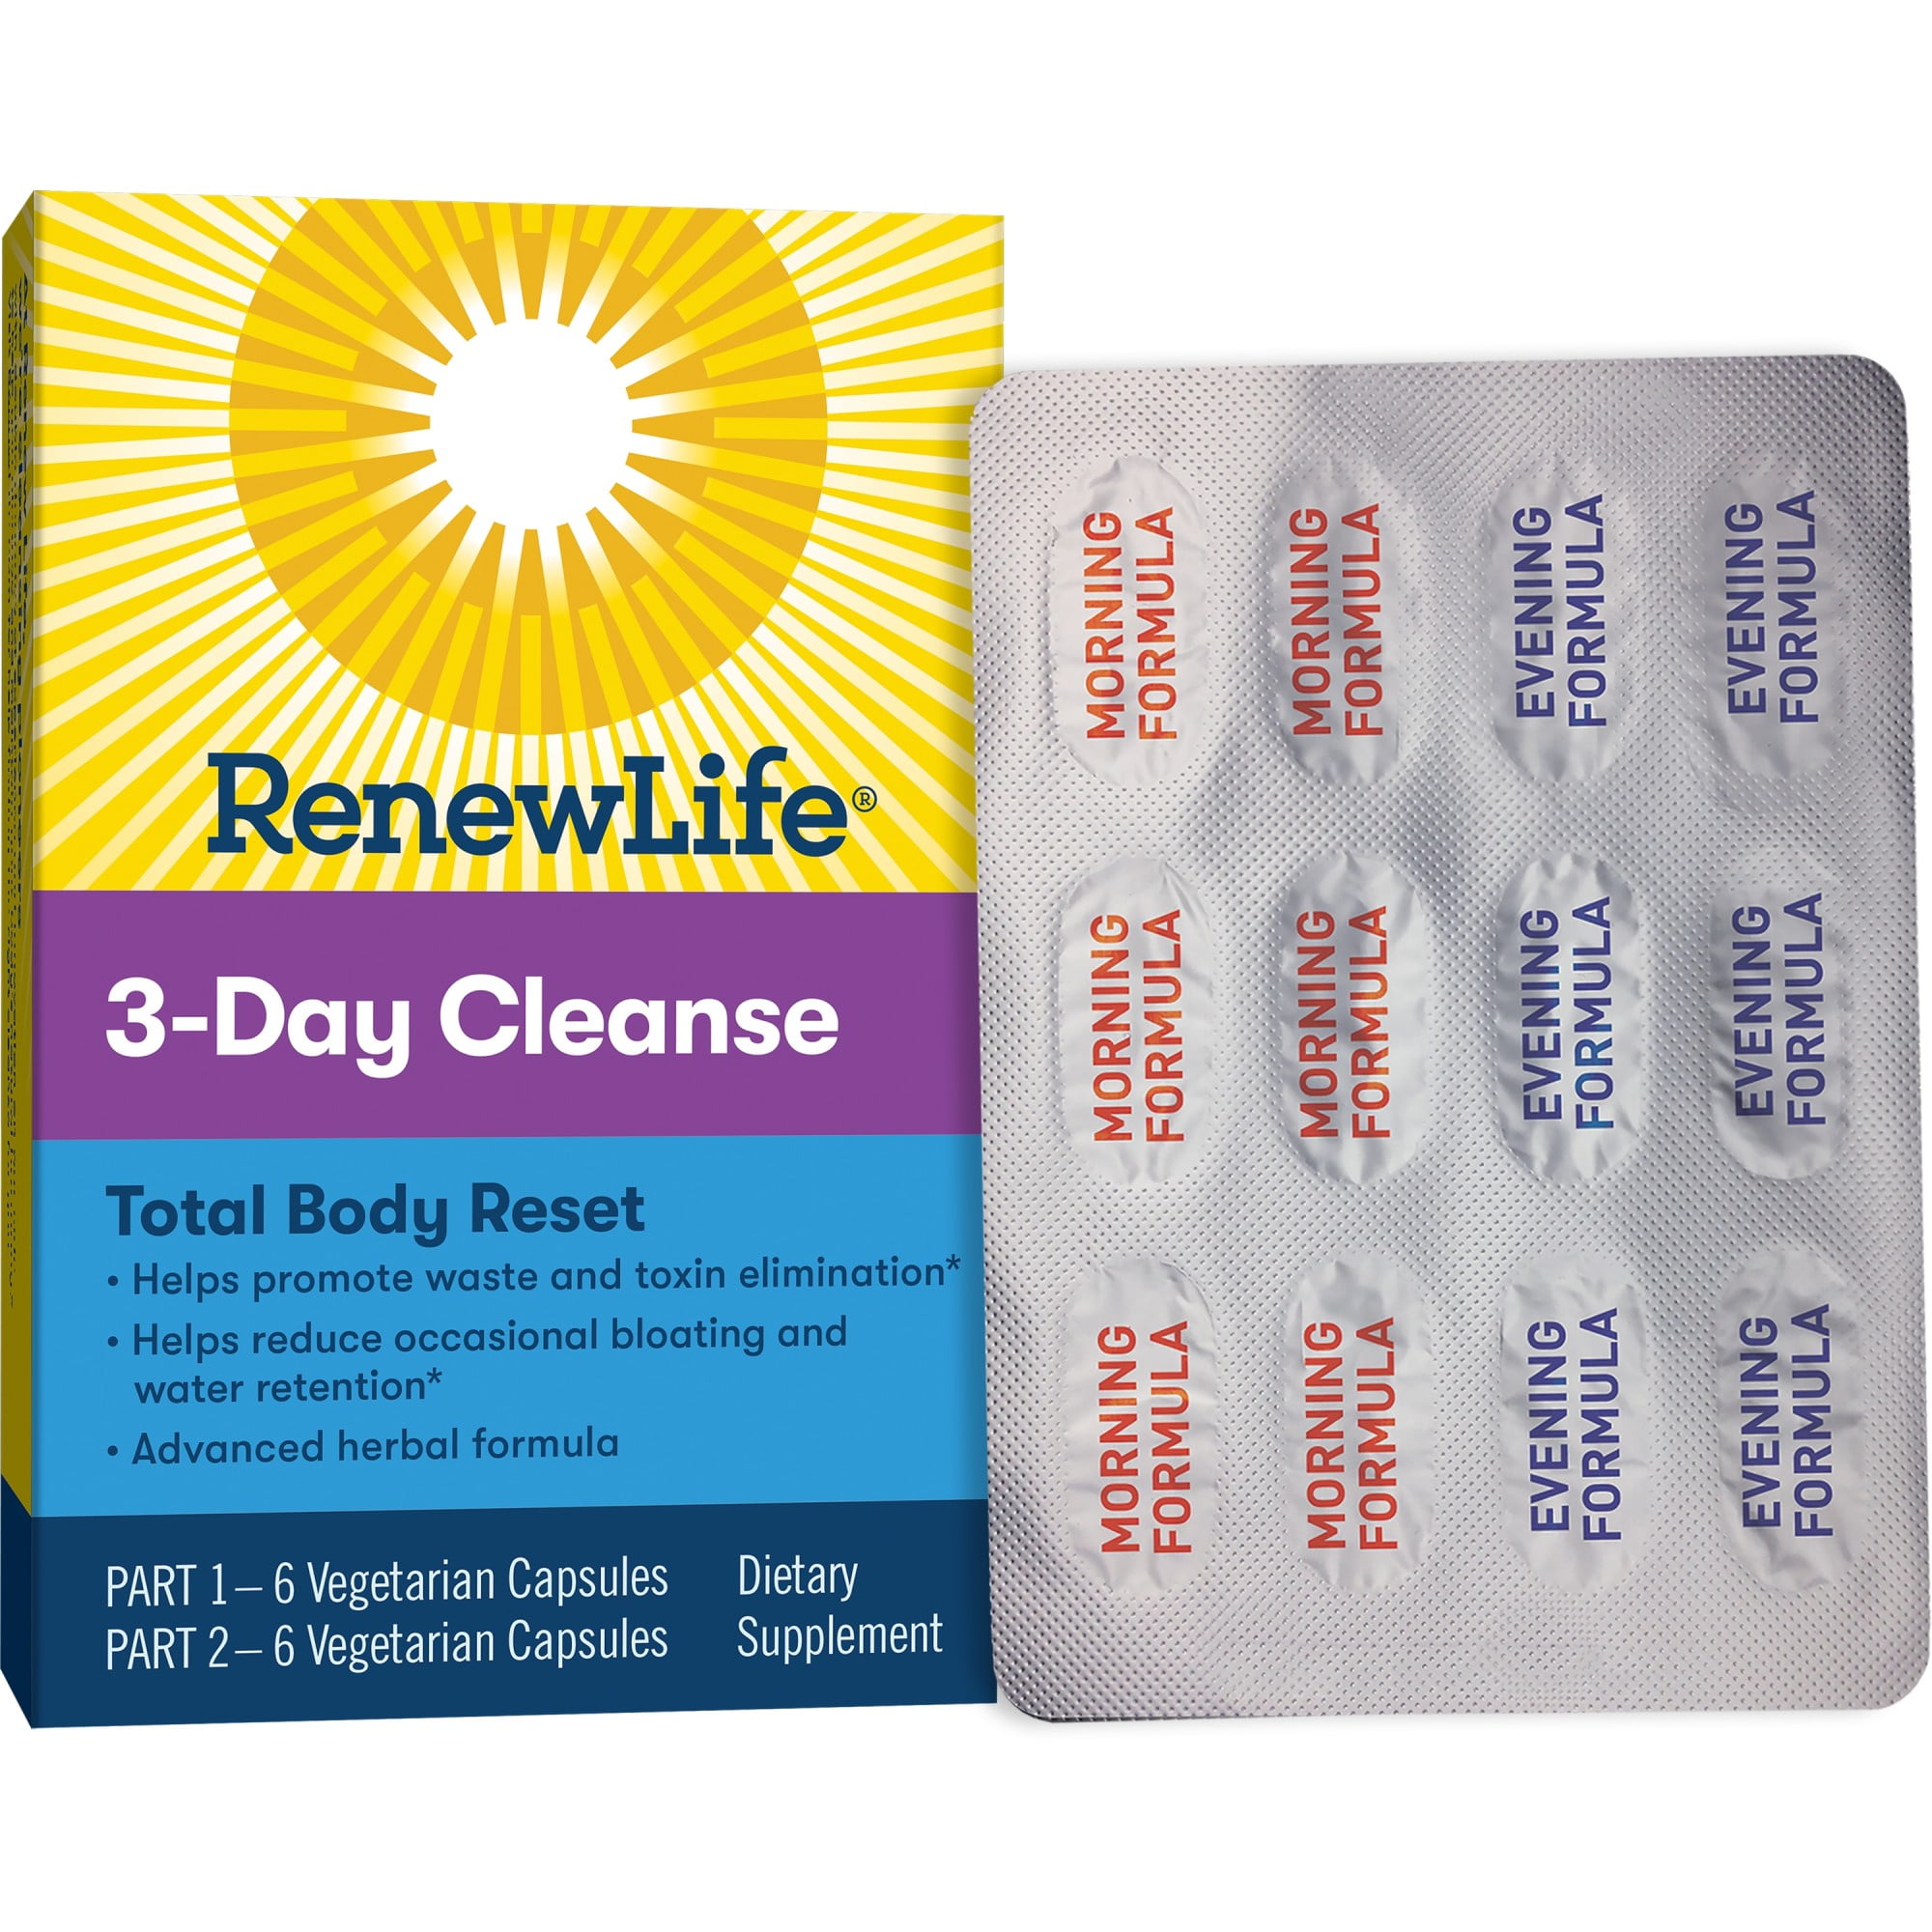 Renew Life Adult Total Body Reset Cleanse, 3-Day Program, 12 Capsules